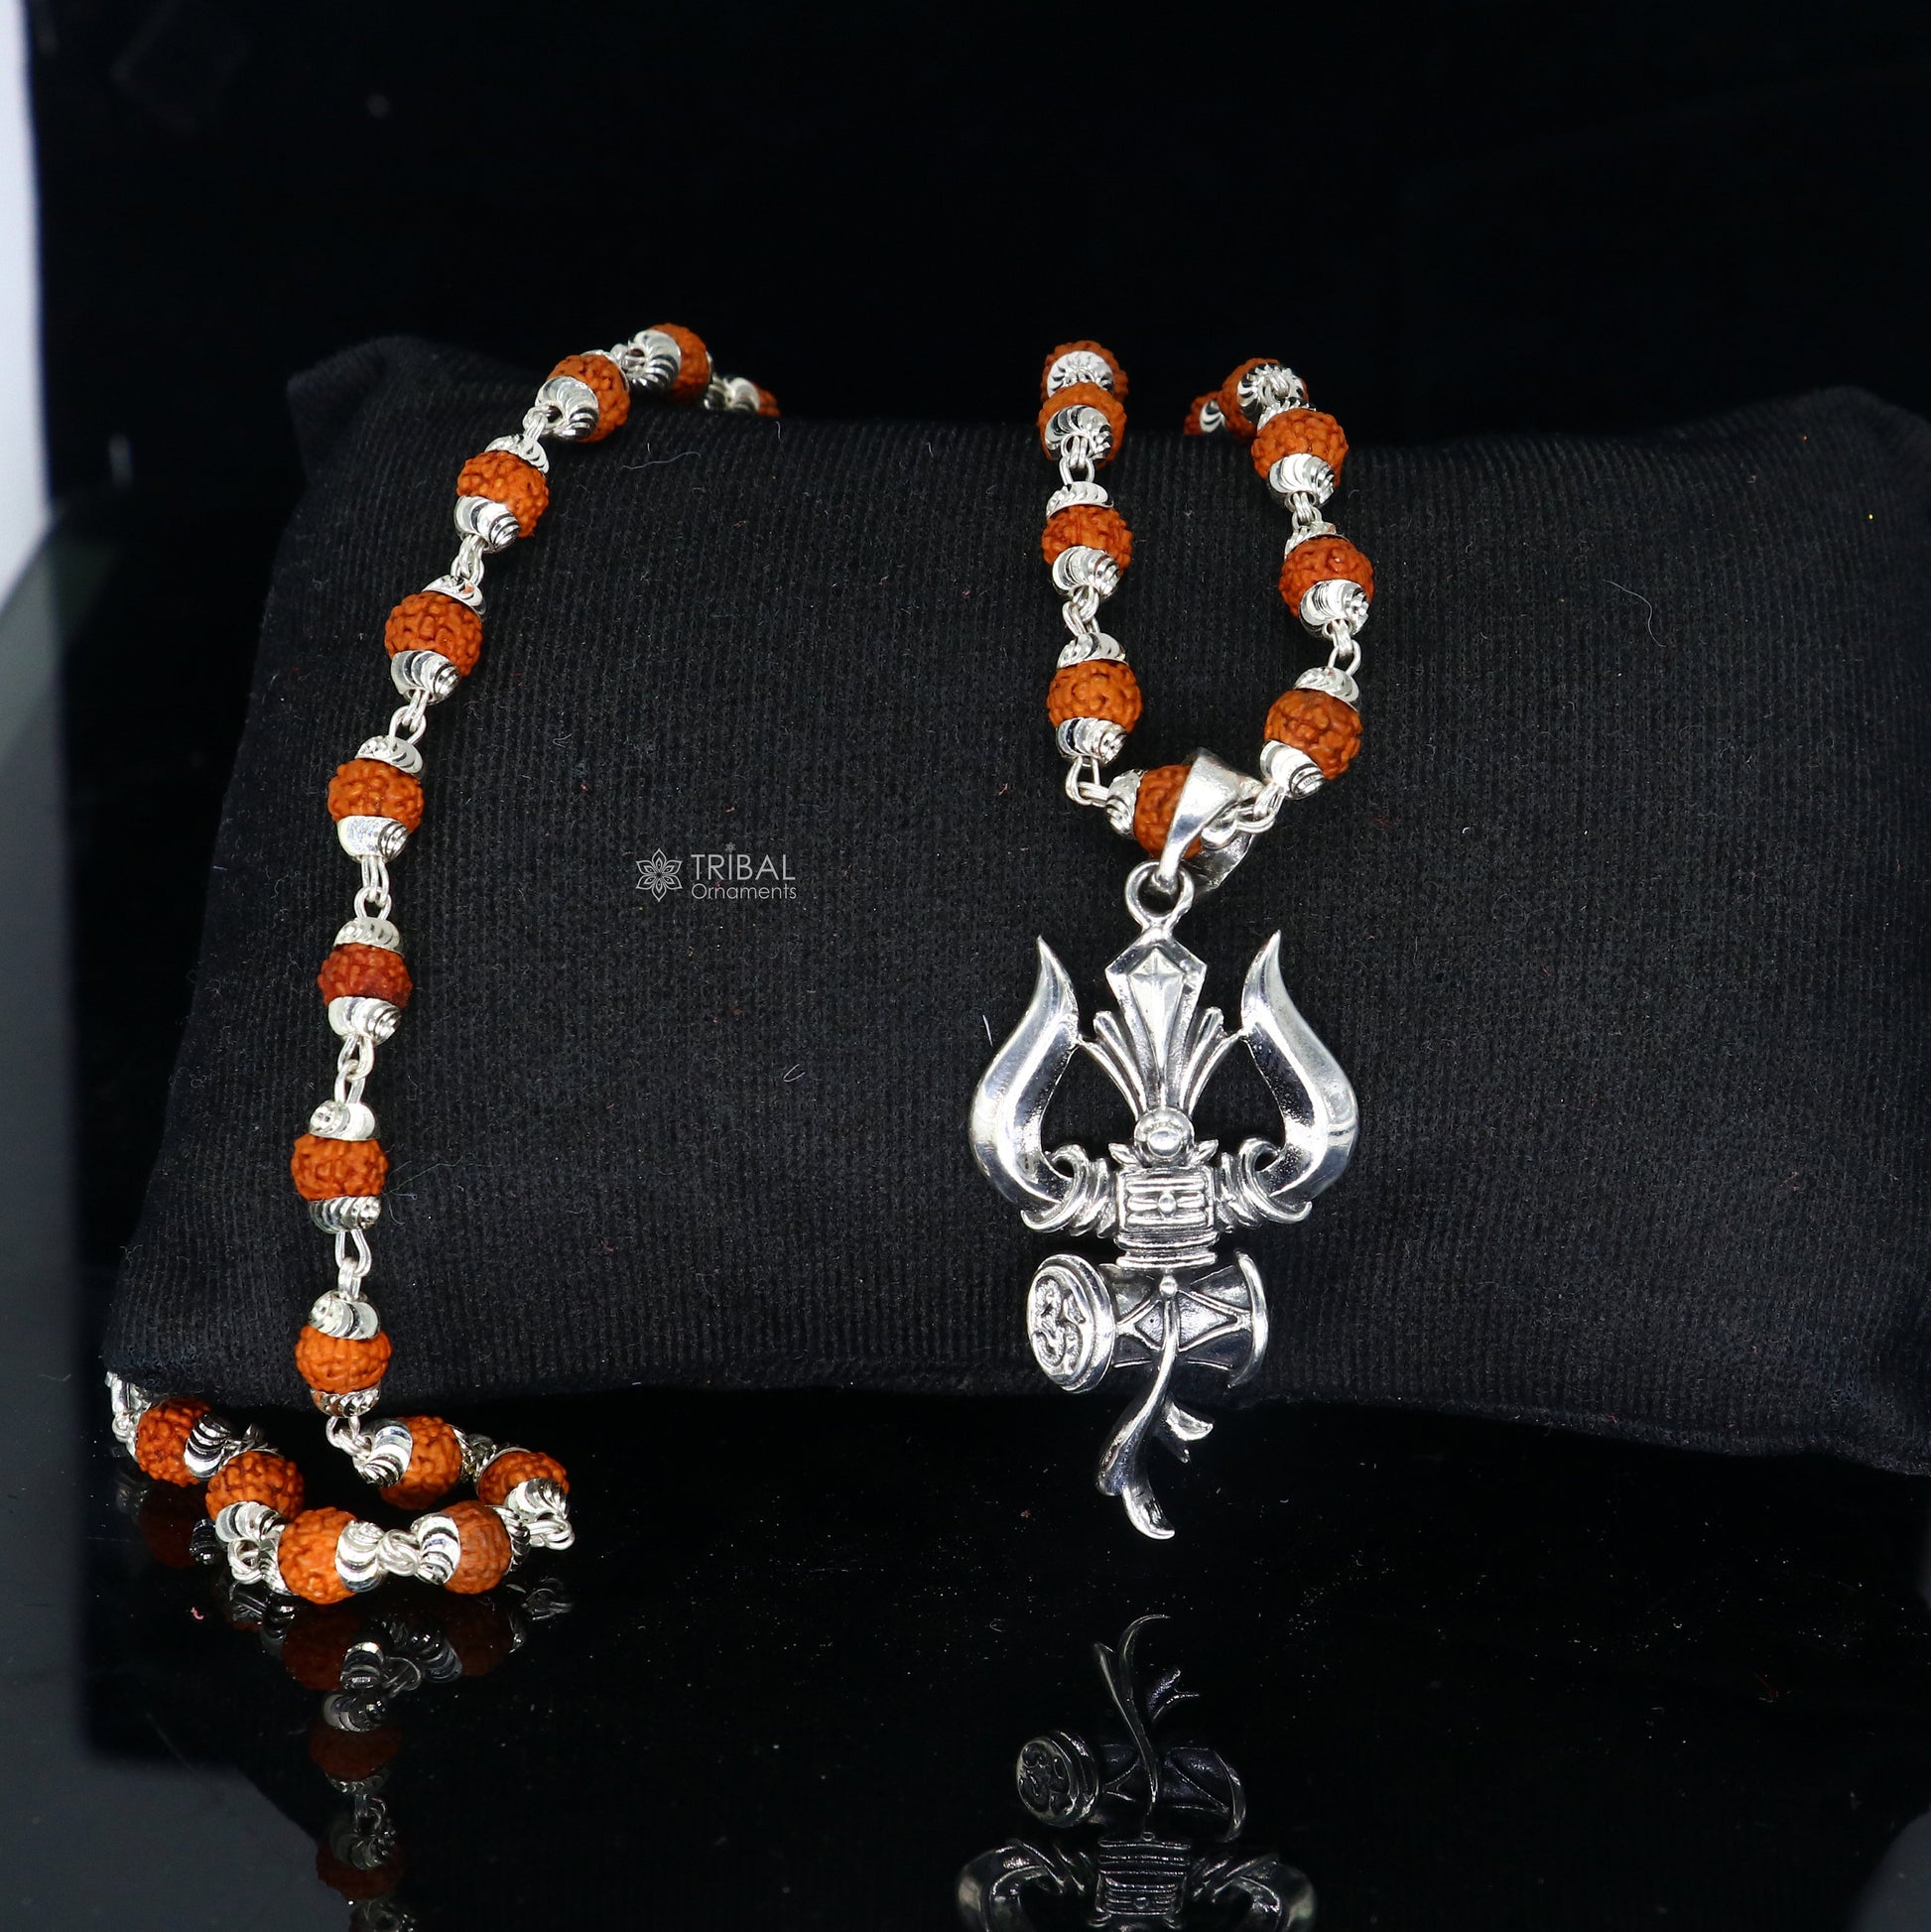 925 sterling silver handmade Divine Lord shiva trident pendant & Rudraksha chain, holy pendant protect from negative energy nsp757 - TRIBAL ORNAMENTS